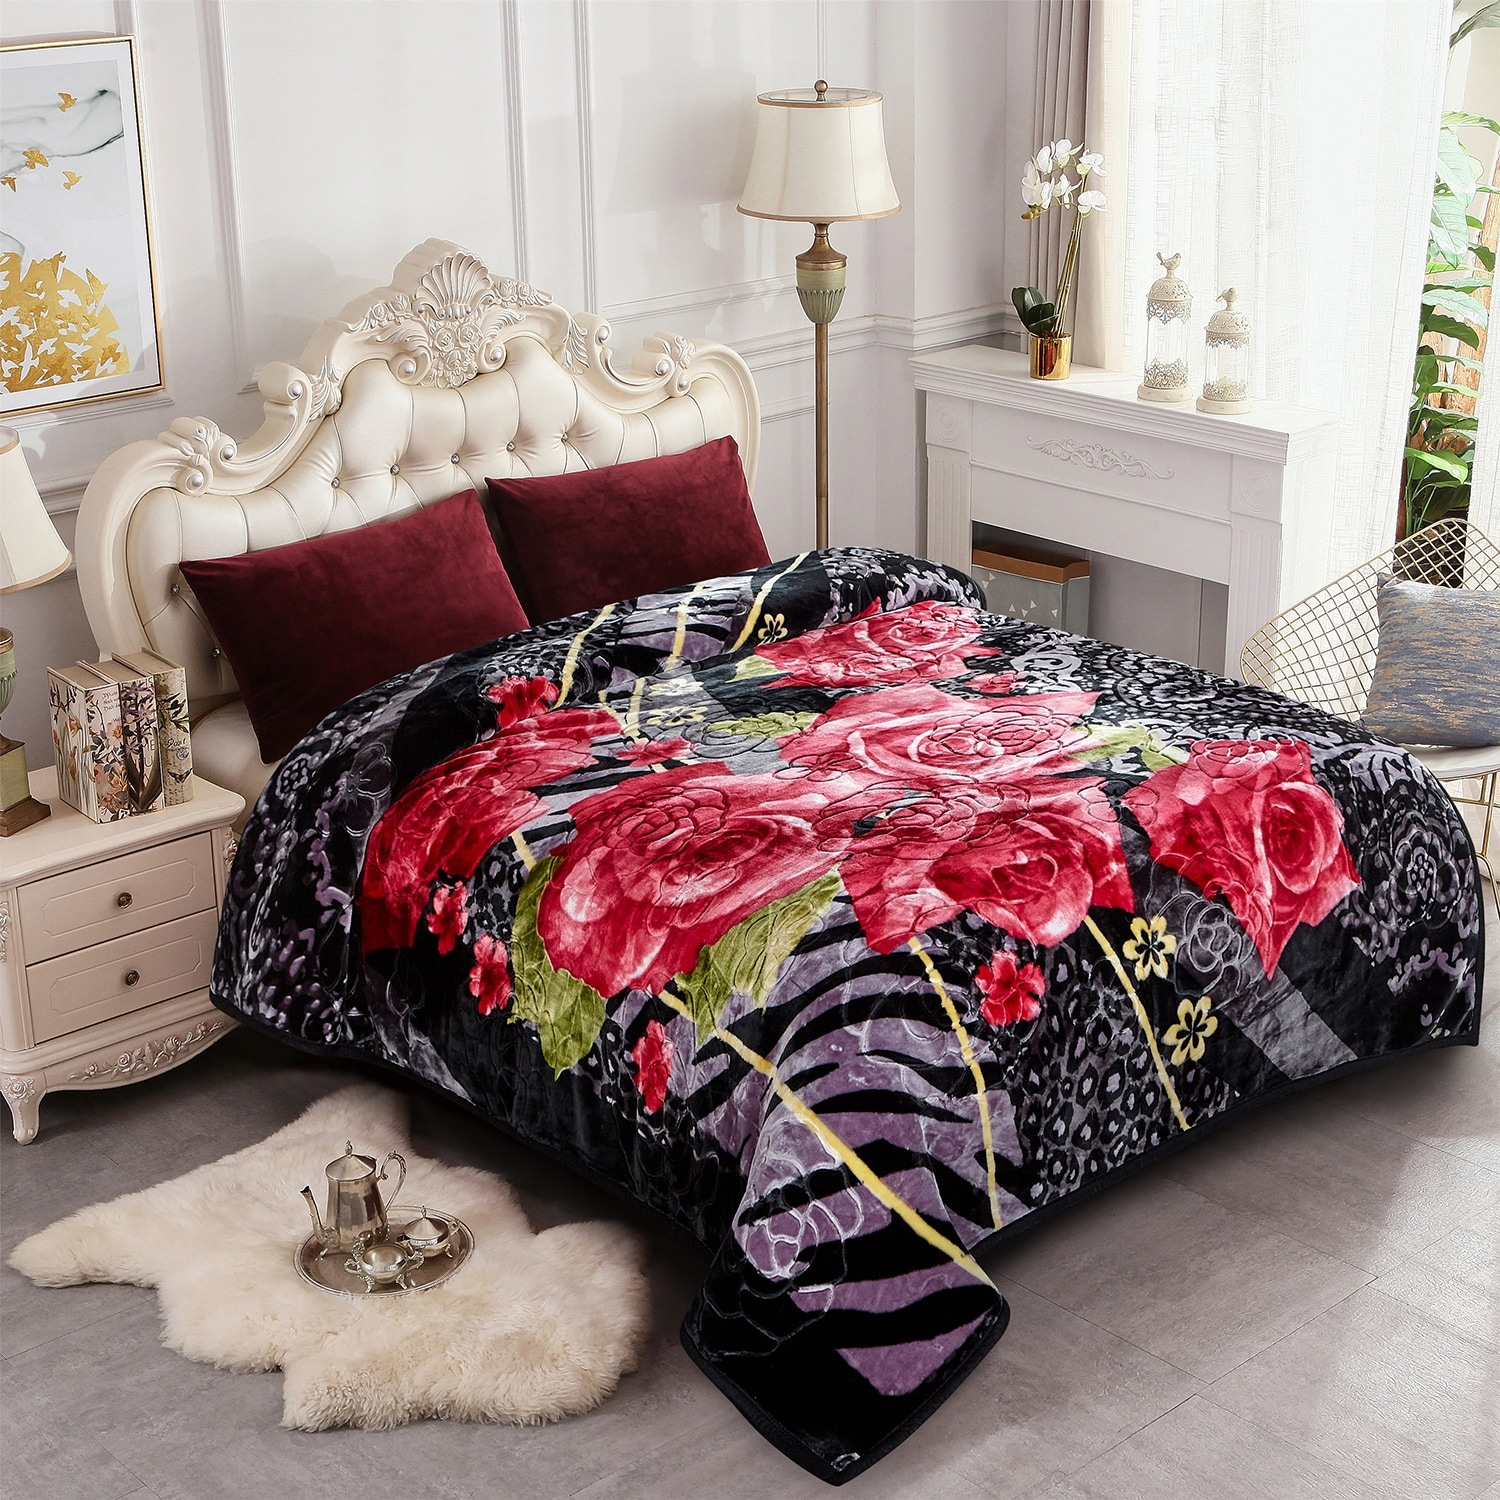 Luxury Heavy Thick Plush Blanket 2 Ply A&B Disign For Winter 79x91 9 lbs  - On Sale - Bed Bath & Beyond - 32360153